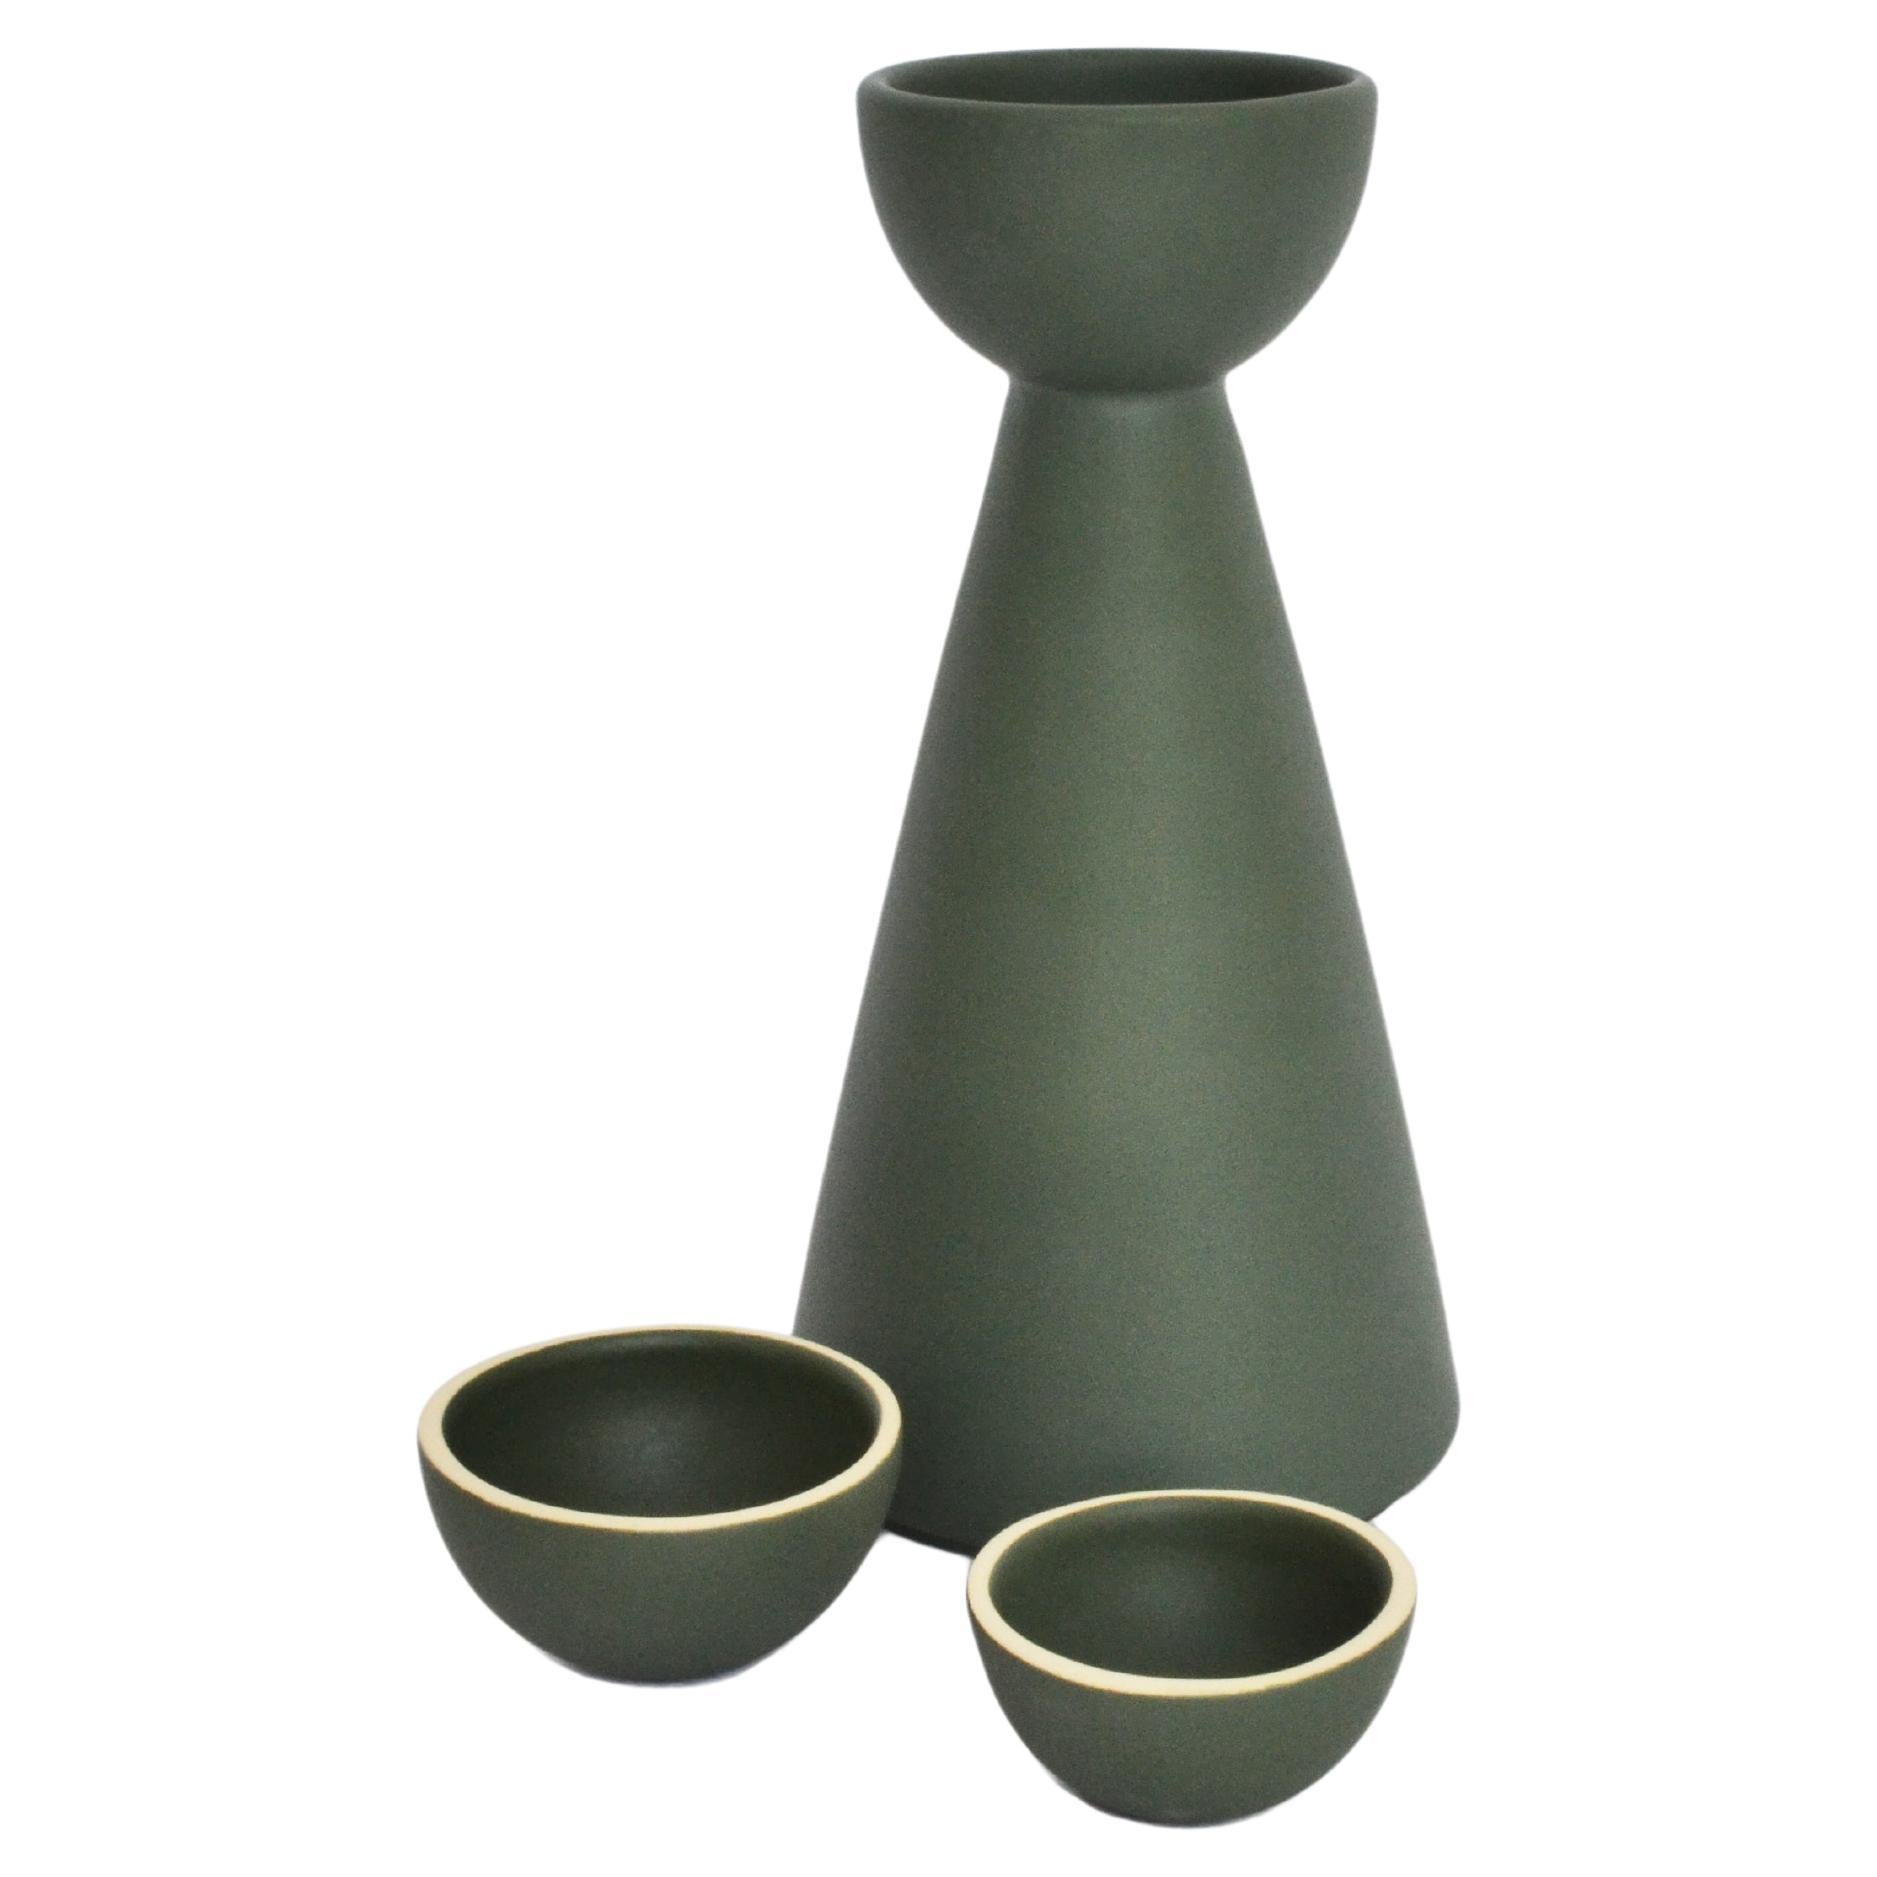 Green Carafe Contemporary Inspired by Traditional Jug Pitcher for Mezcal For Sale